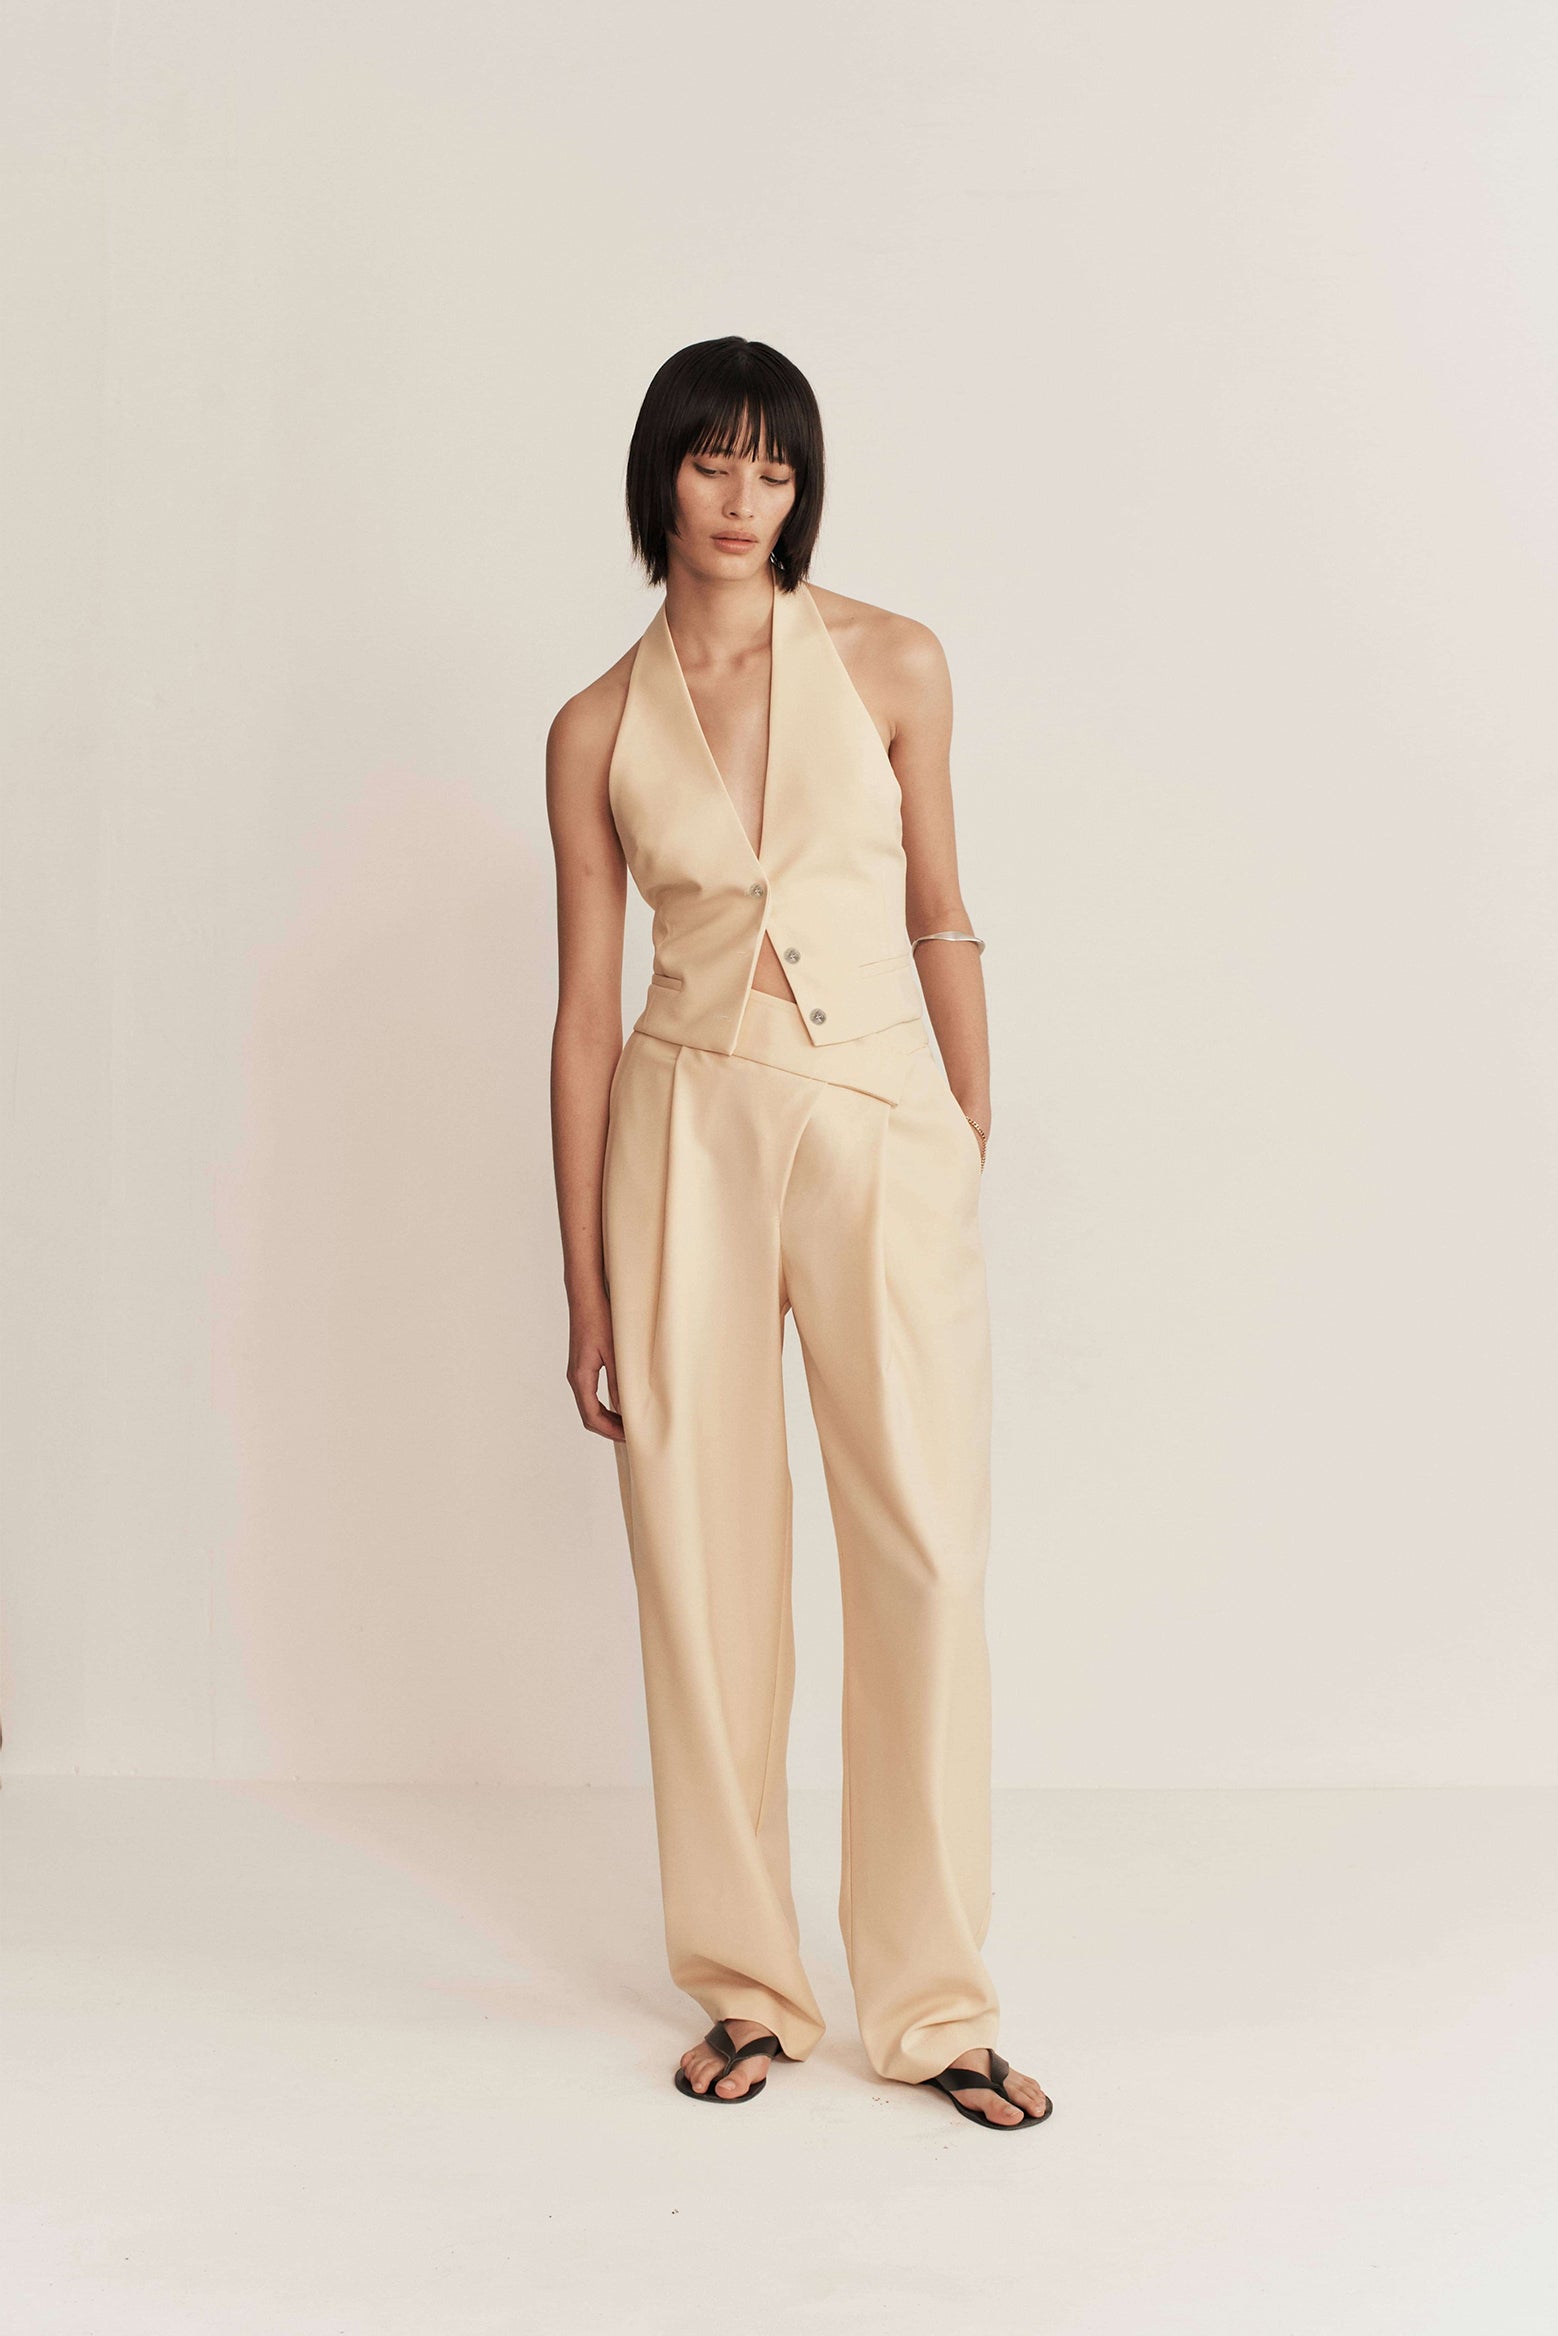 Esse Delphi Tailored Trouser in Butter available at The New Trend Australia.